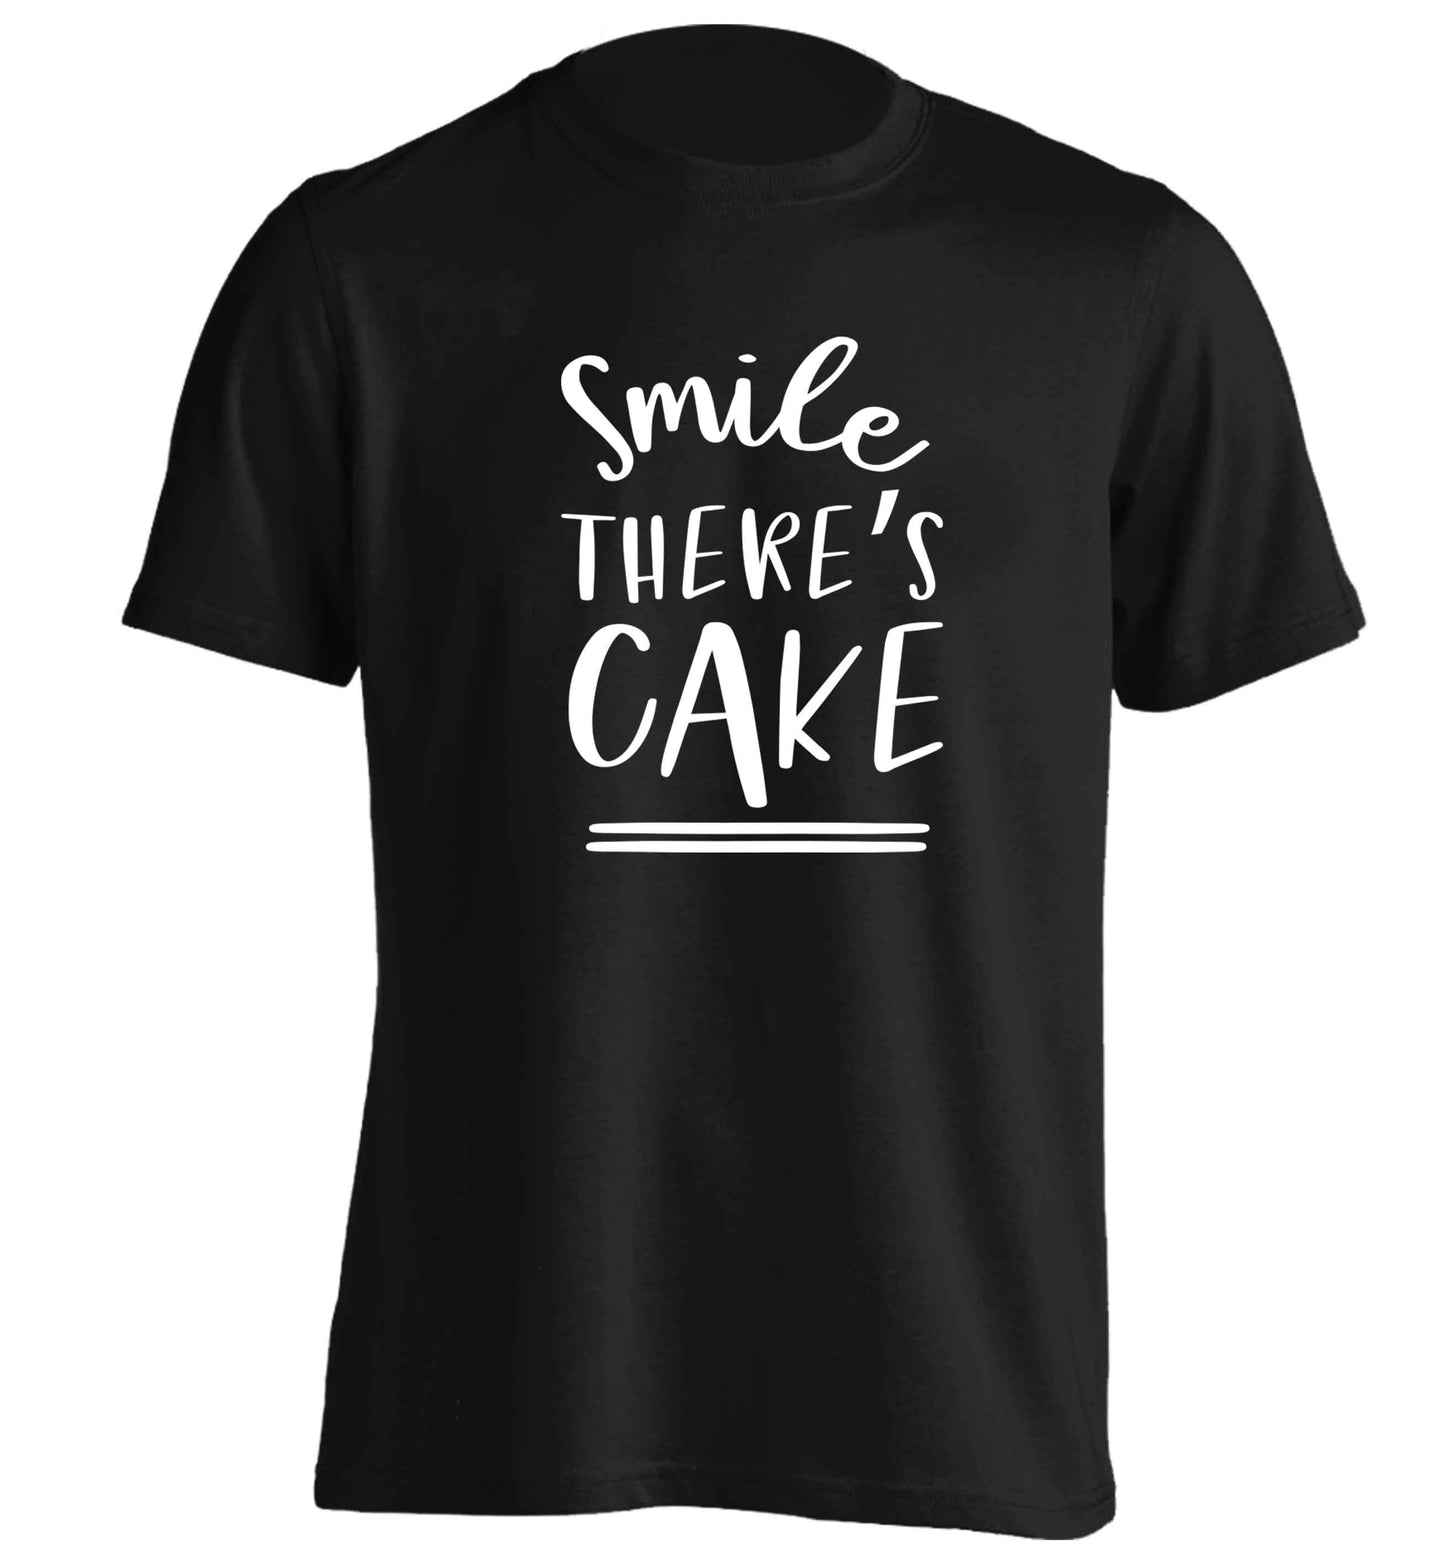 Smile there's cake adults unisex black Tshirt 2XL